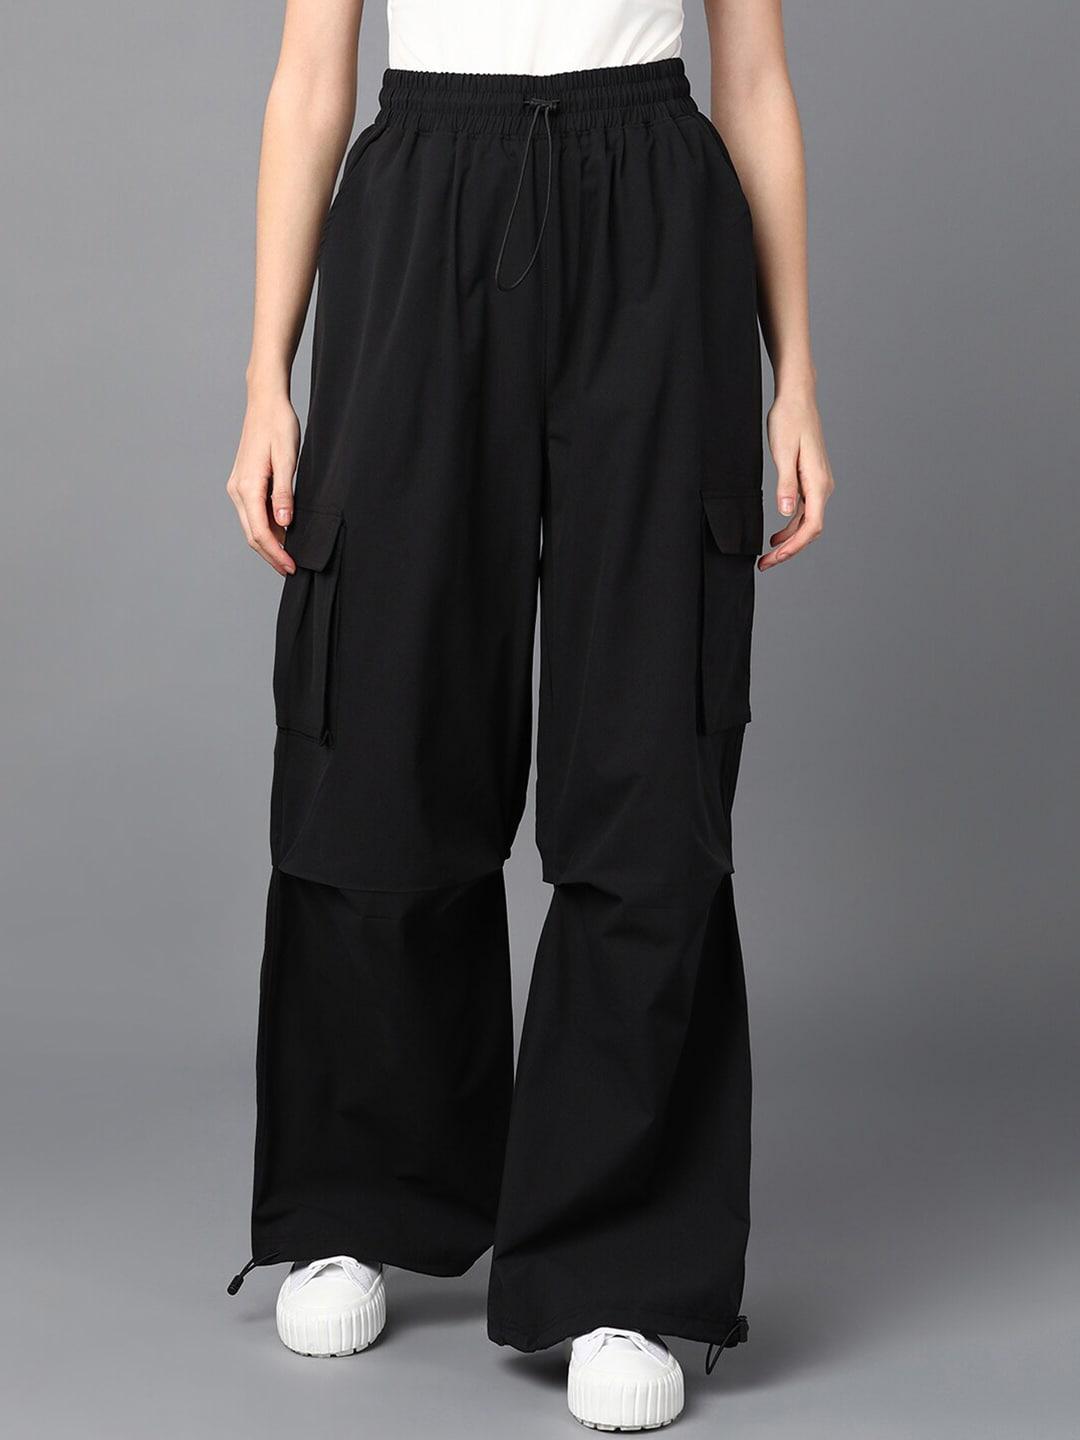 the-roadster-lifestyle-co.-women-straight-fit-high-rise-rapid-dry-track-pants